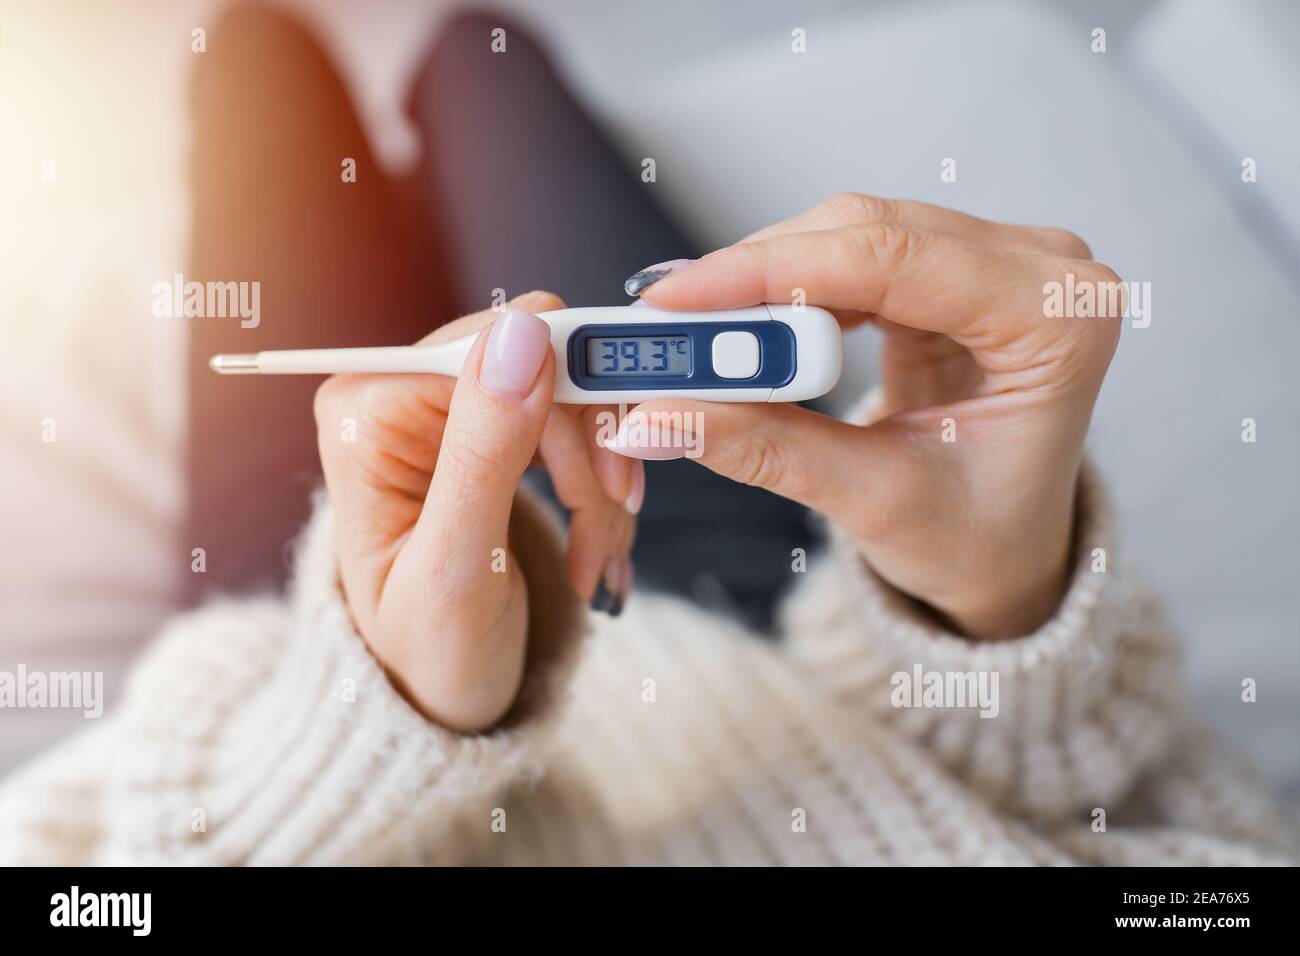 https://c8.alamy.com/comp/2EA76X5/close-up-of-woman-hands-with-a-medical-thermometer-with-very-high-body-temperature-393-fever-2EA76X5.jpg